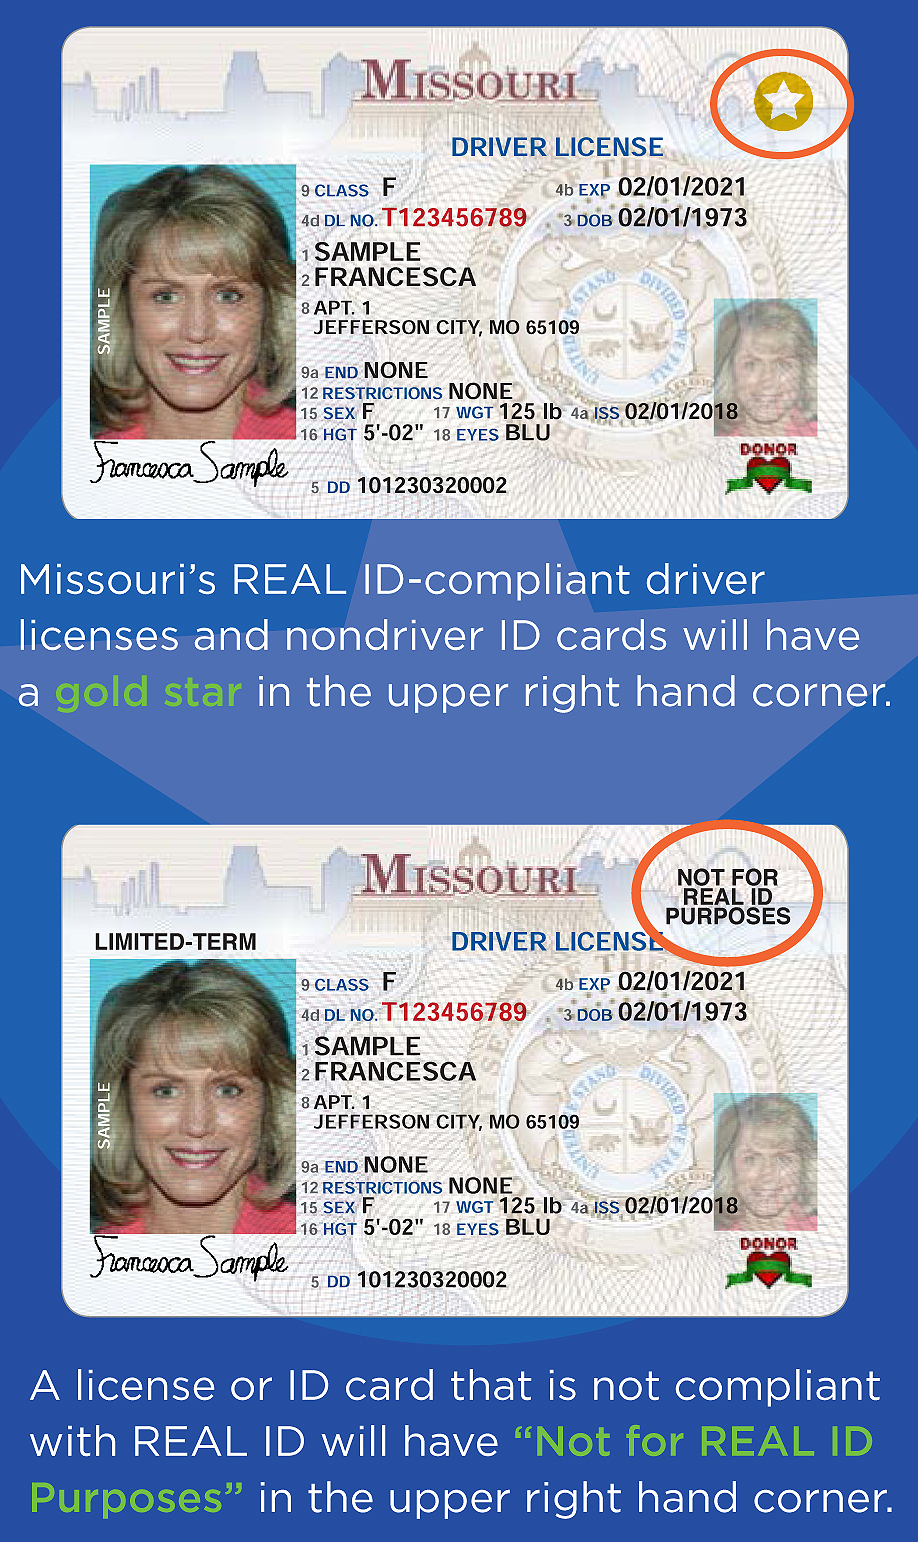 Who Issues Missouri Drivers License